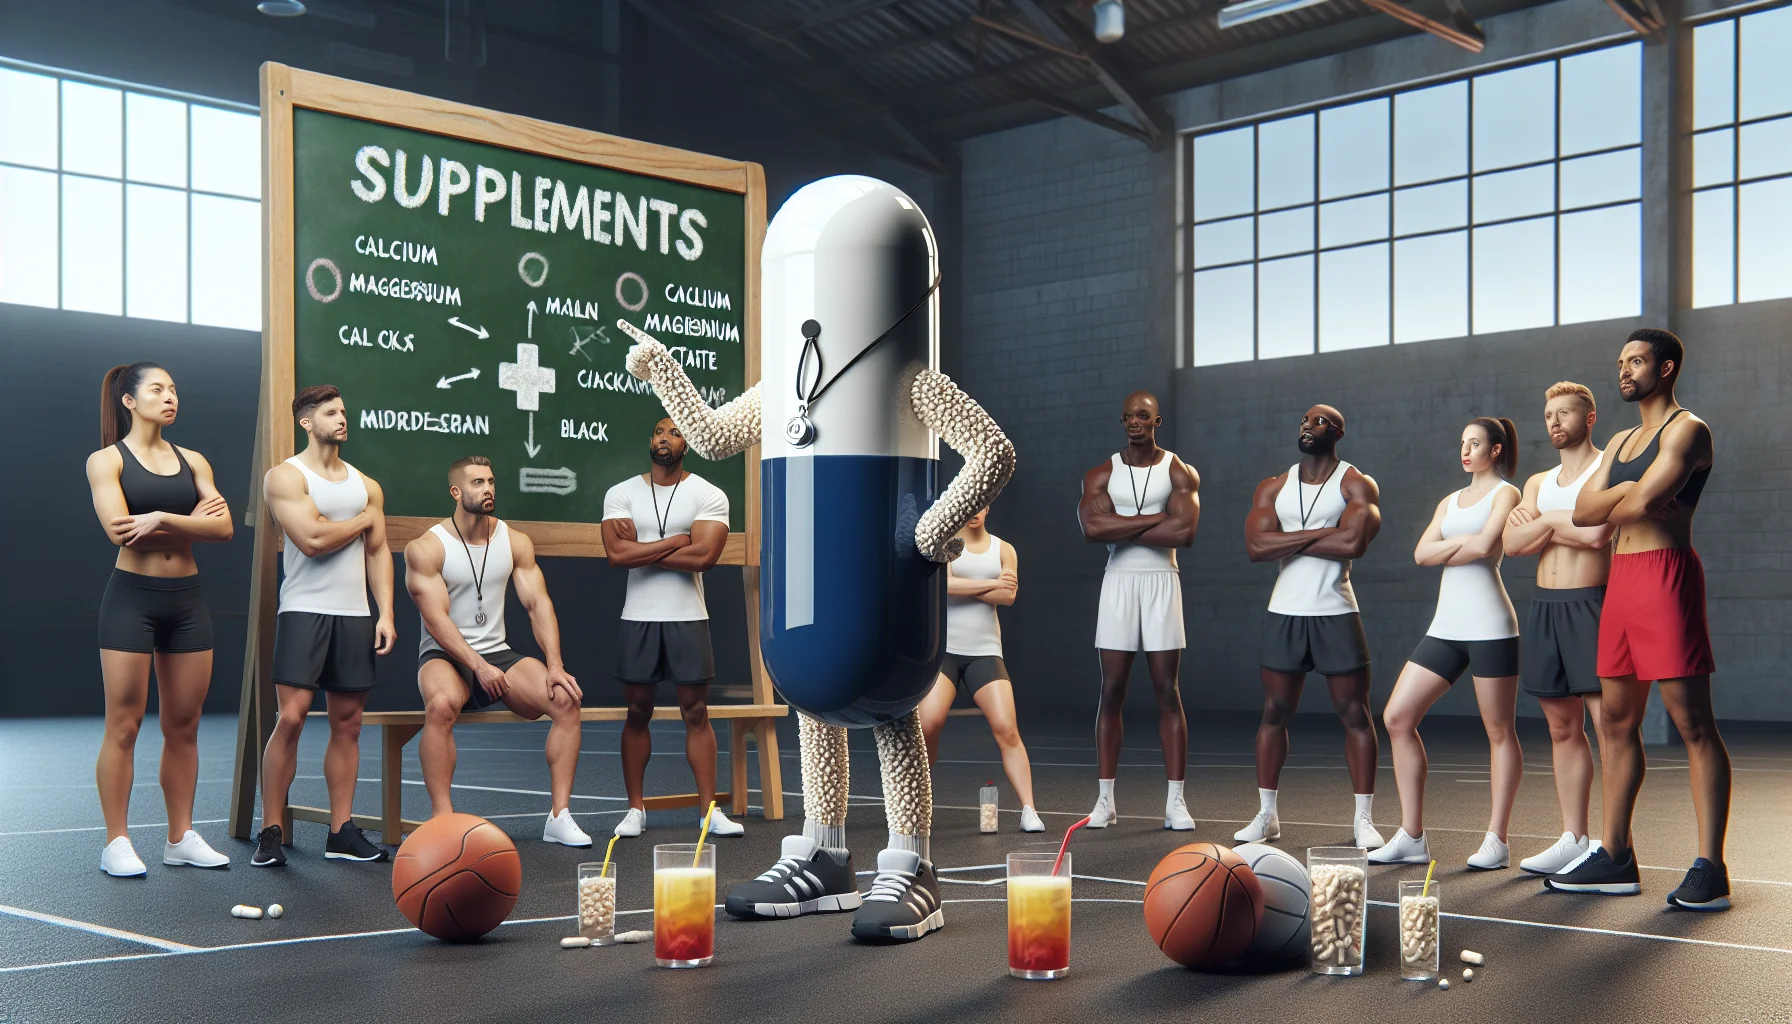 Create a humorous and realistic image depicting a sports scene where a calcium magnesium acetate capsule is portrayed as a sports coach. The coaching capsule stands on a gym floor with a whistle around its neck, chalkboard behind it displaying health benefits. The capsule talks to a diverse group of athletes, both male and female of different descents like Caucasian, Hispanic, Black, Middle-Eastern, and South Asian, educating them about the importance of supplements. Athletes listen attentively with drinks in their hands that visibly contain dissolved supplements. Make sure the scene radiates positive encouragement for taking supplements in sports.